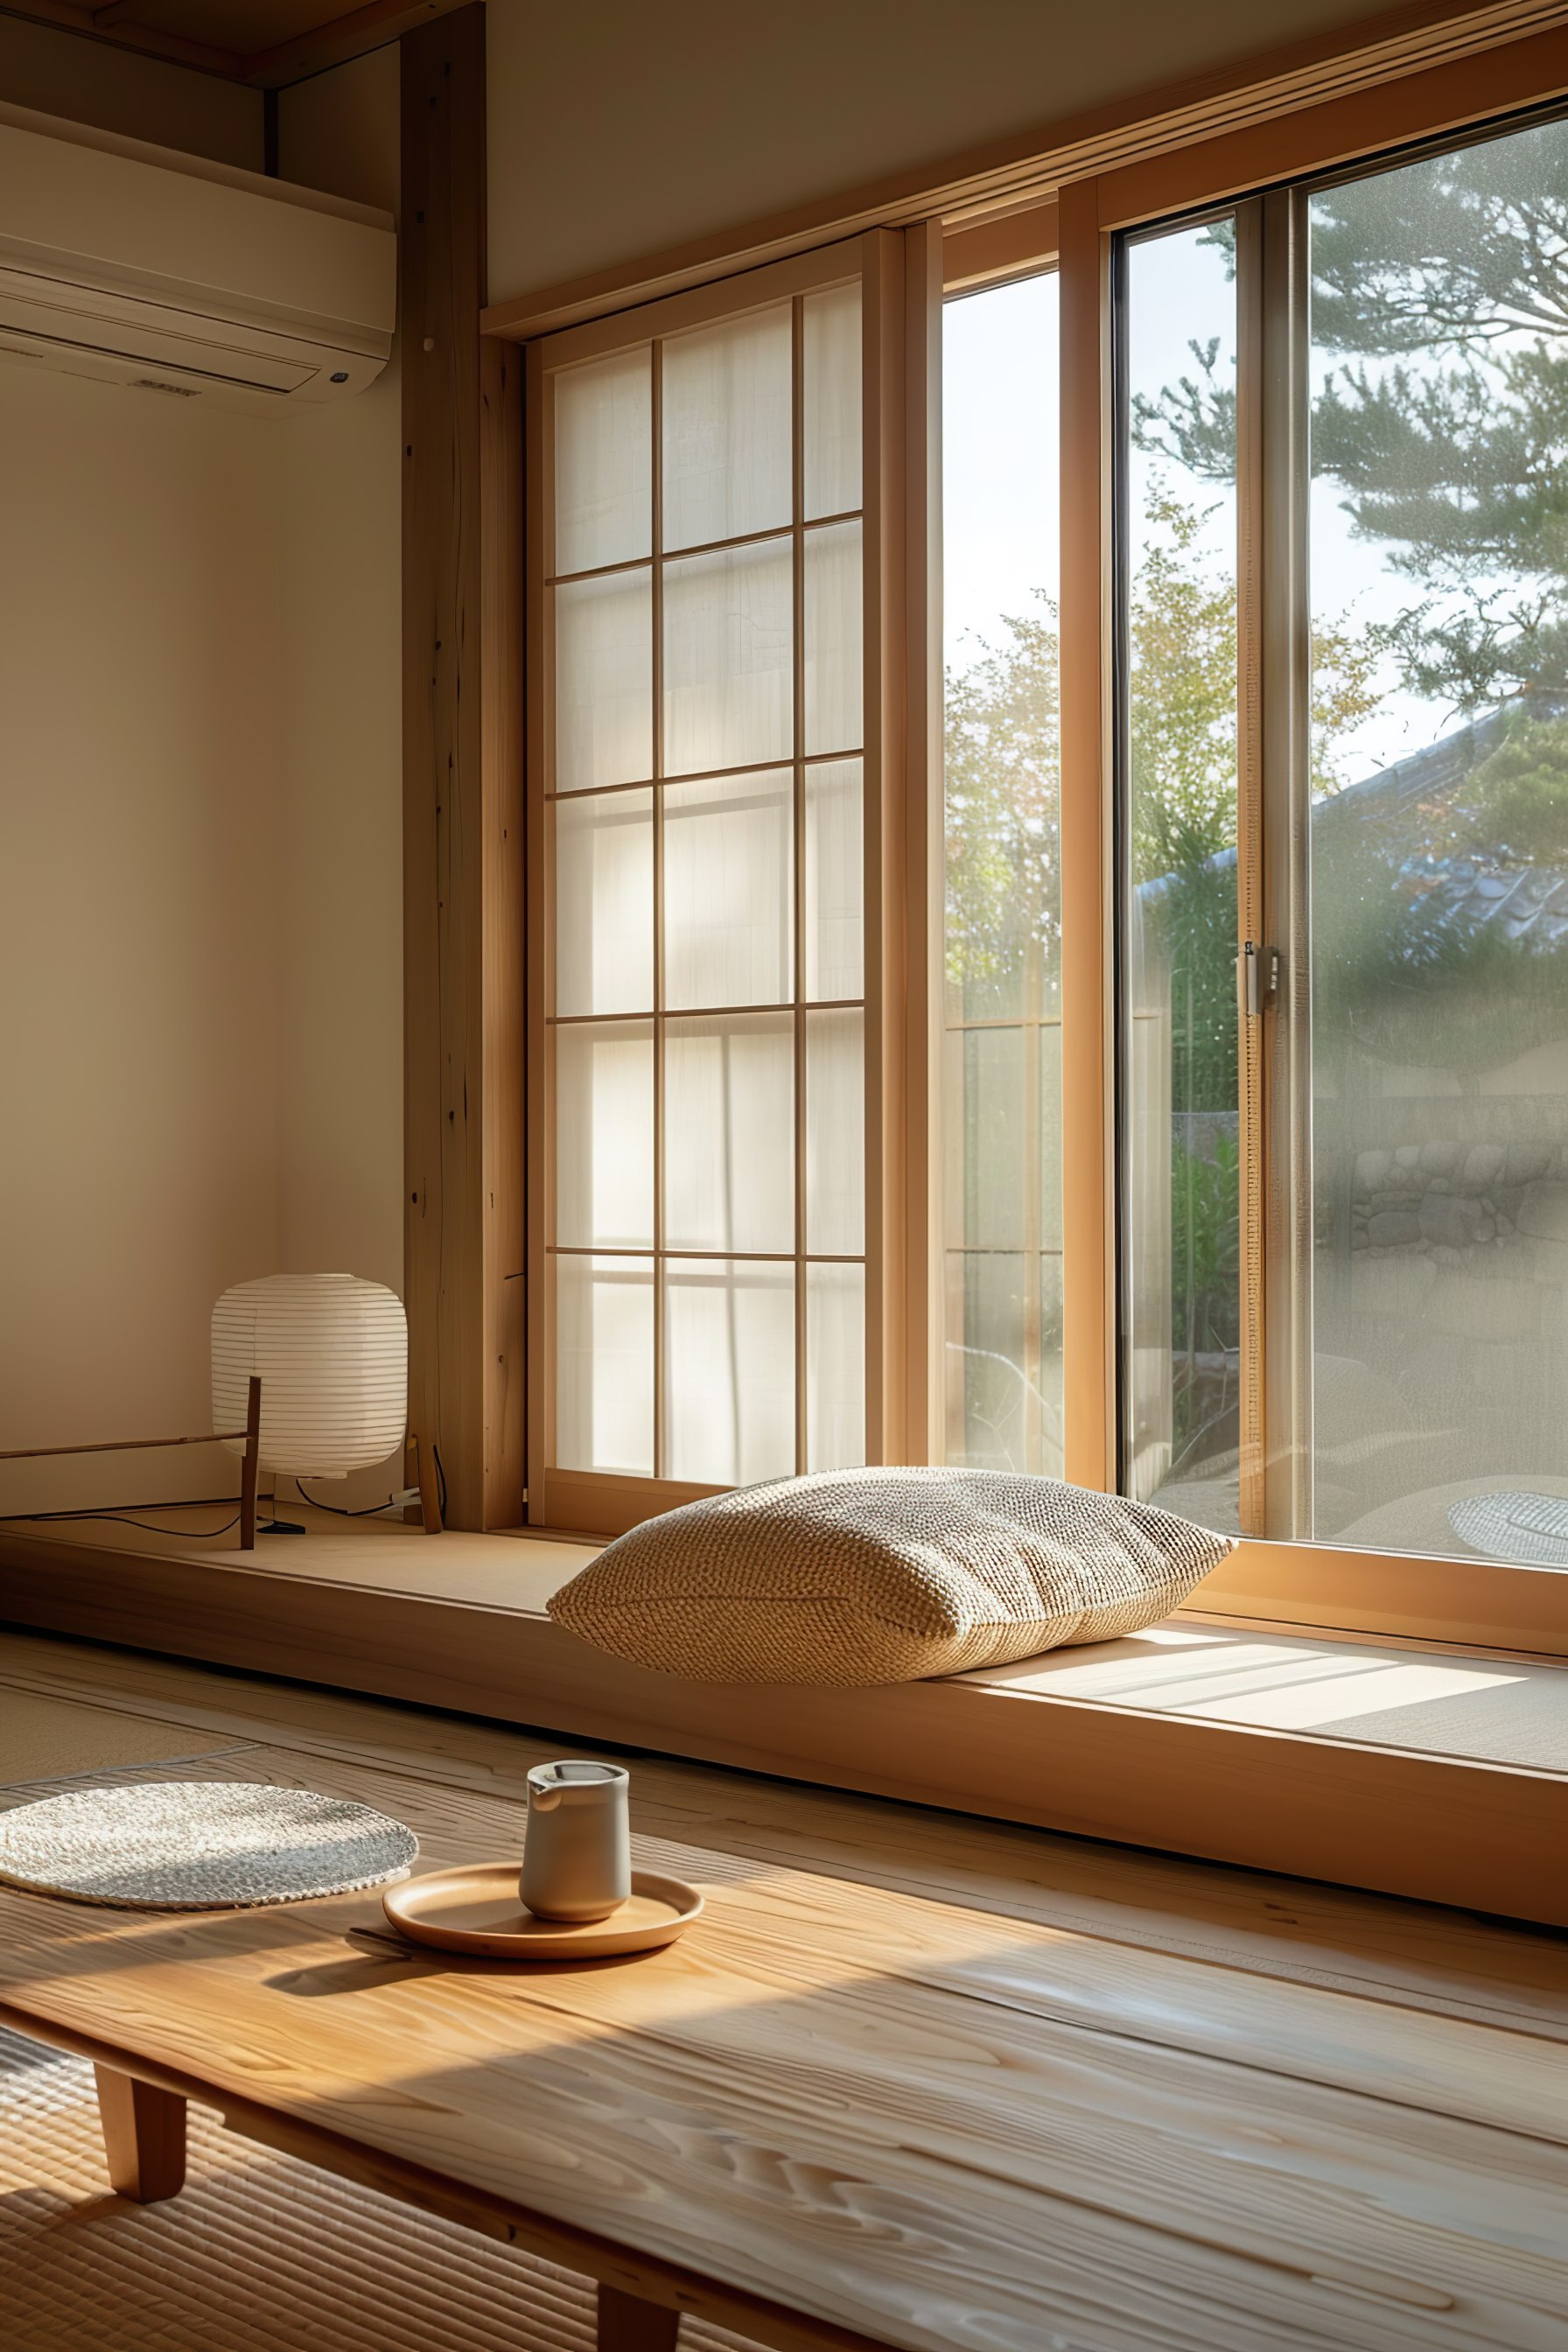 Cozy minimalist interior with natural light, tatami floor, cushion, low table, and shoji screen by the window.